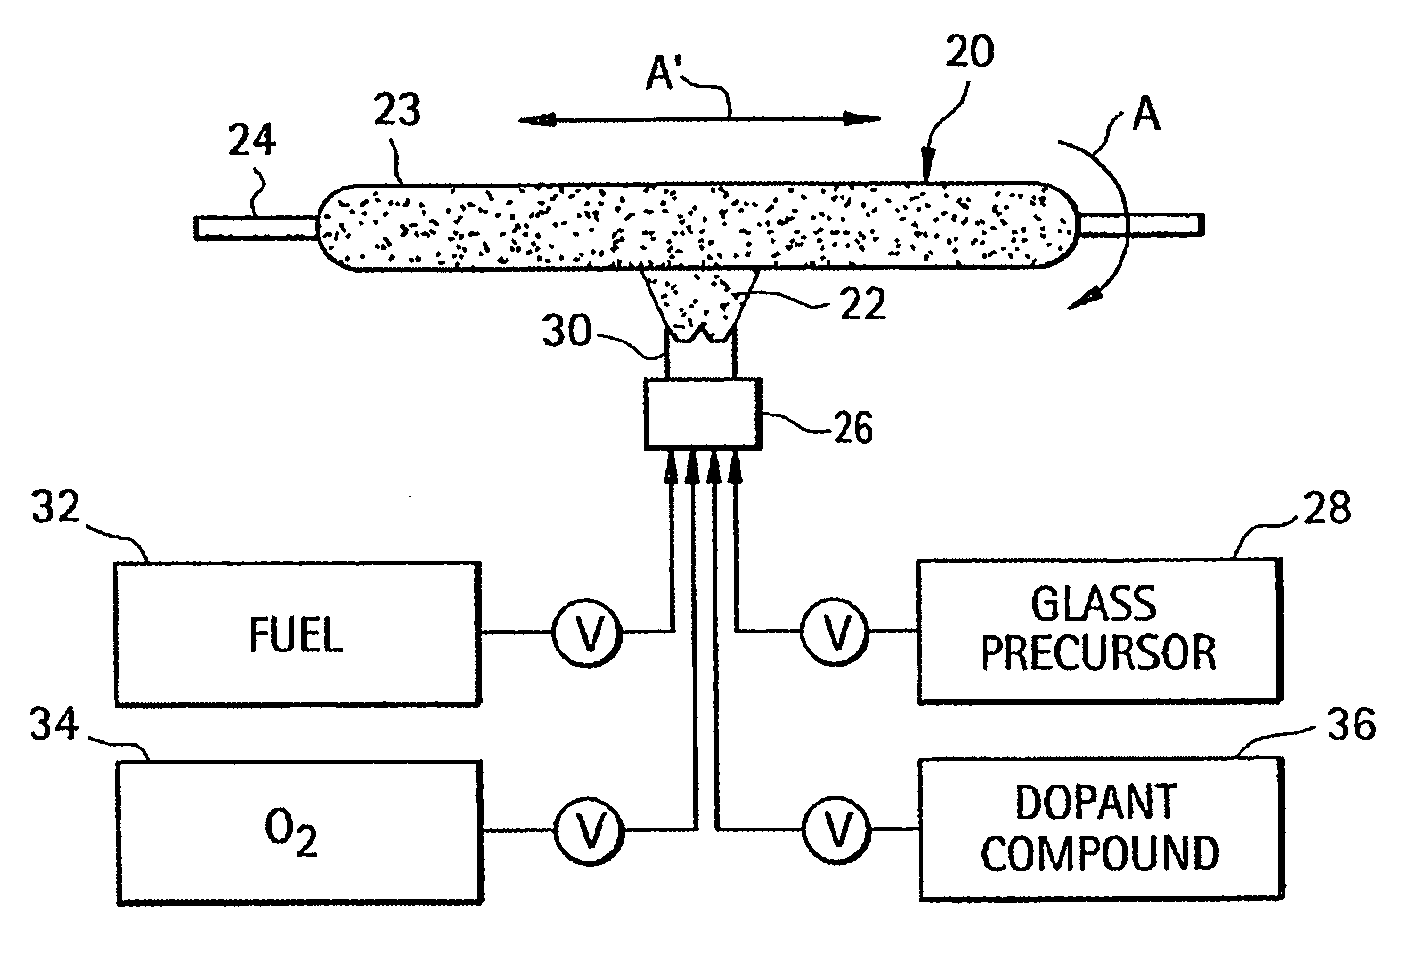 Microstructured optical fibers and methods